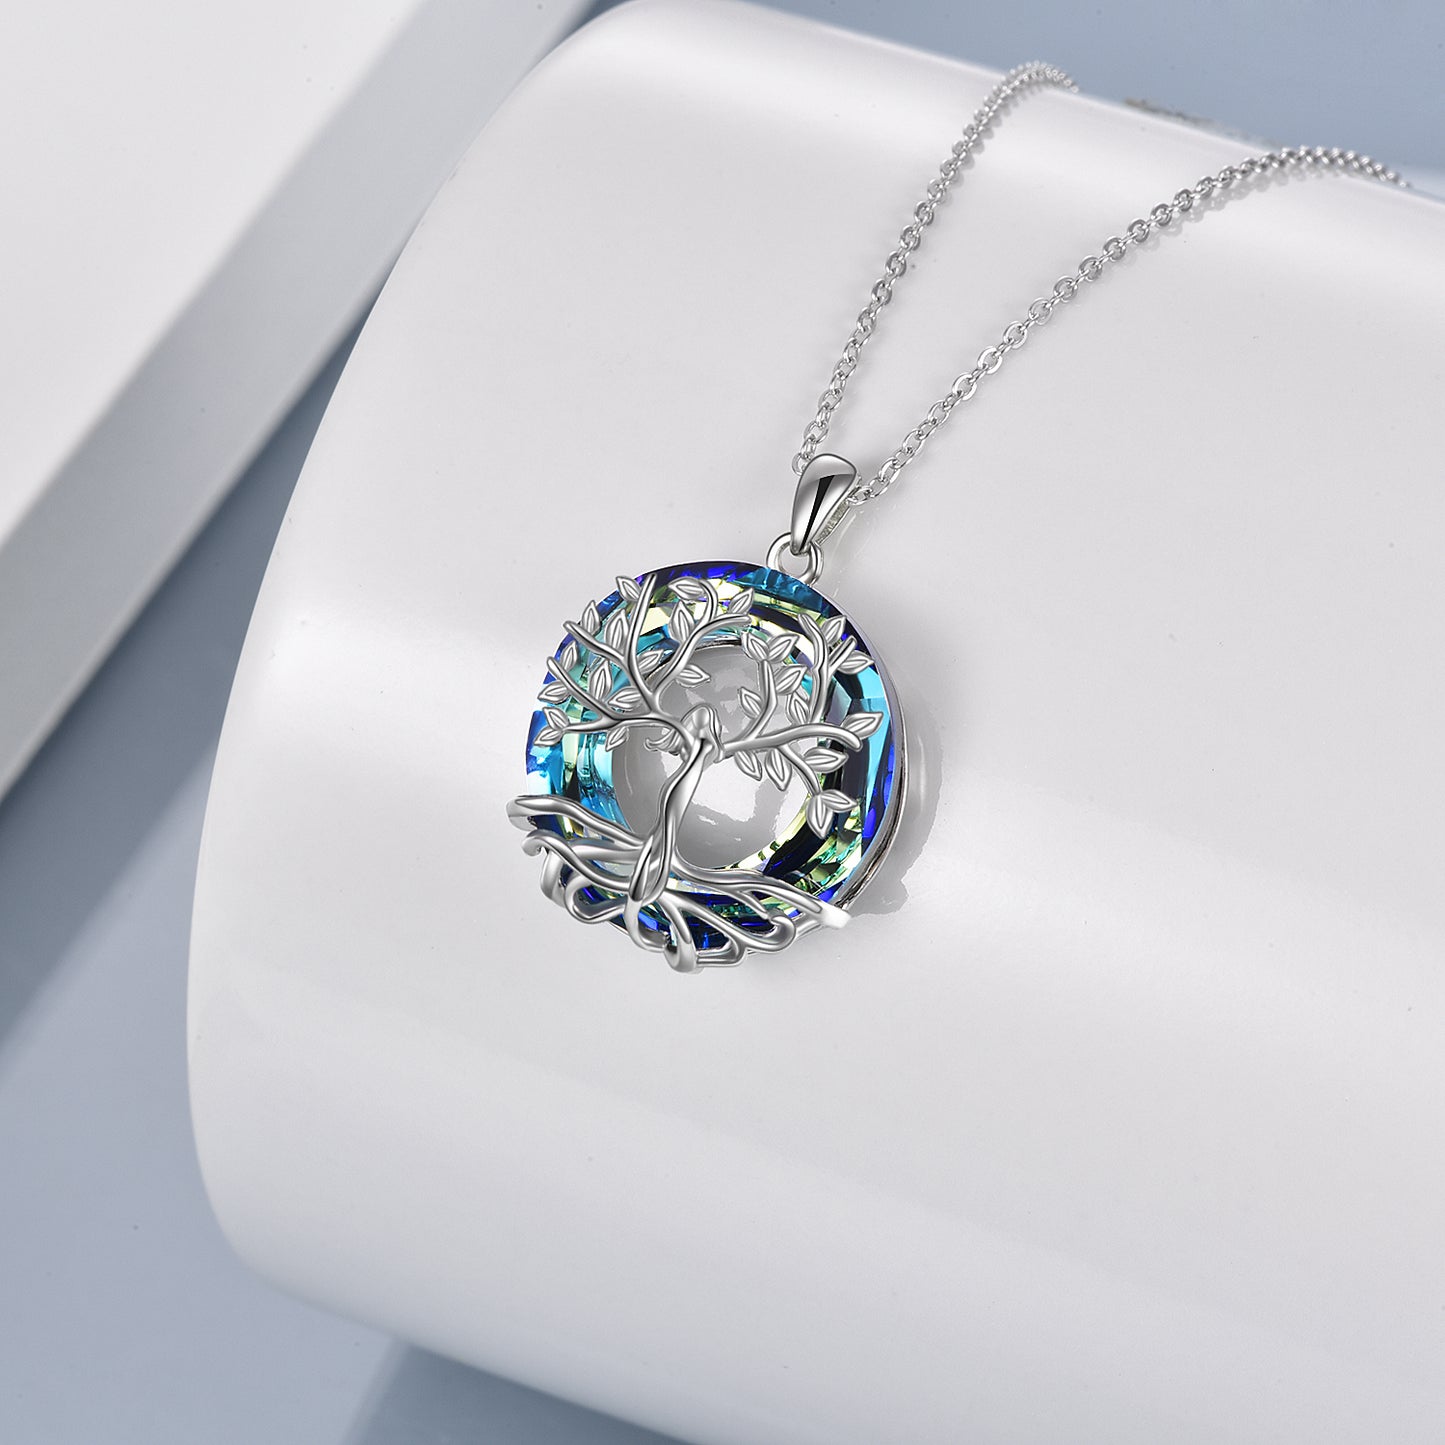 Sterling Silver & Swarovski Crystal Tree of Life Necklace - Fine Jewelry For Women & Girls